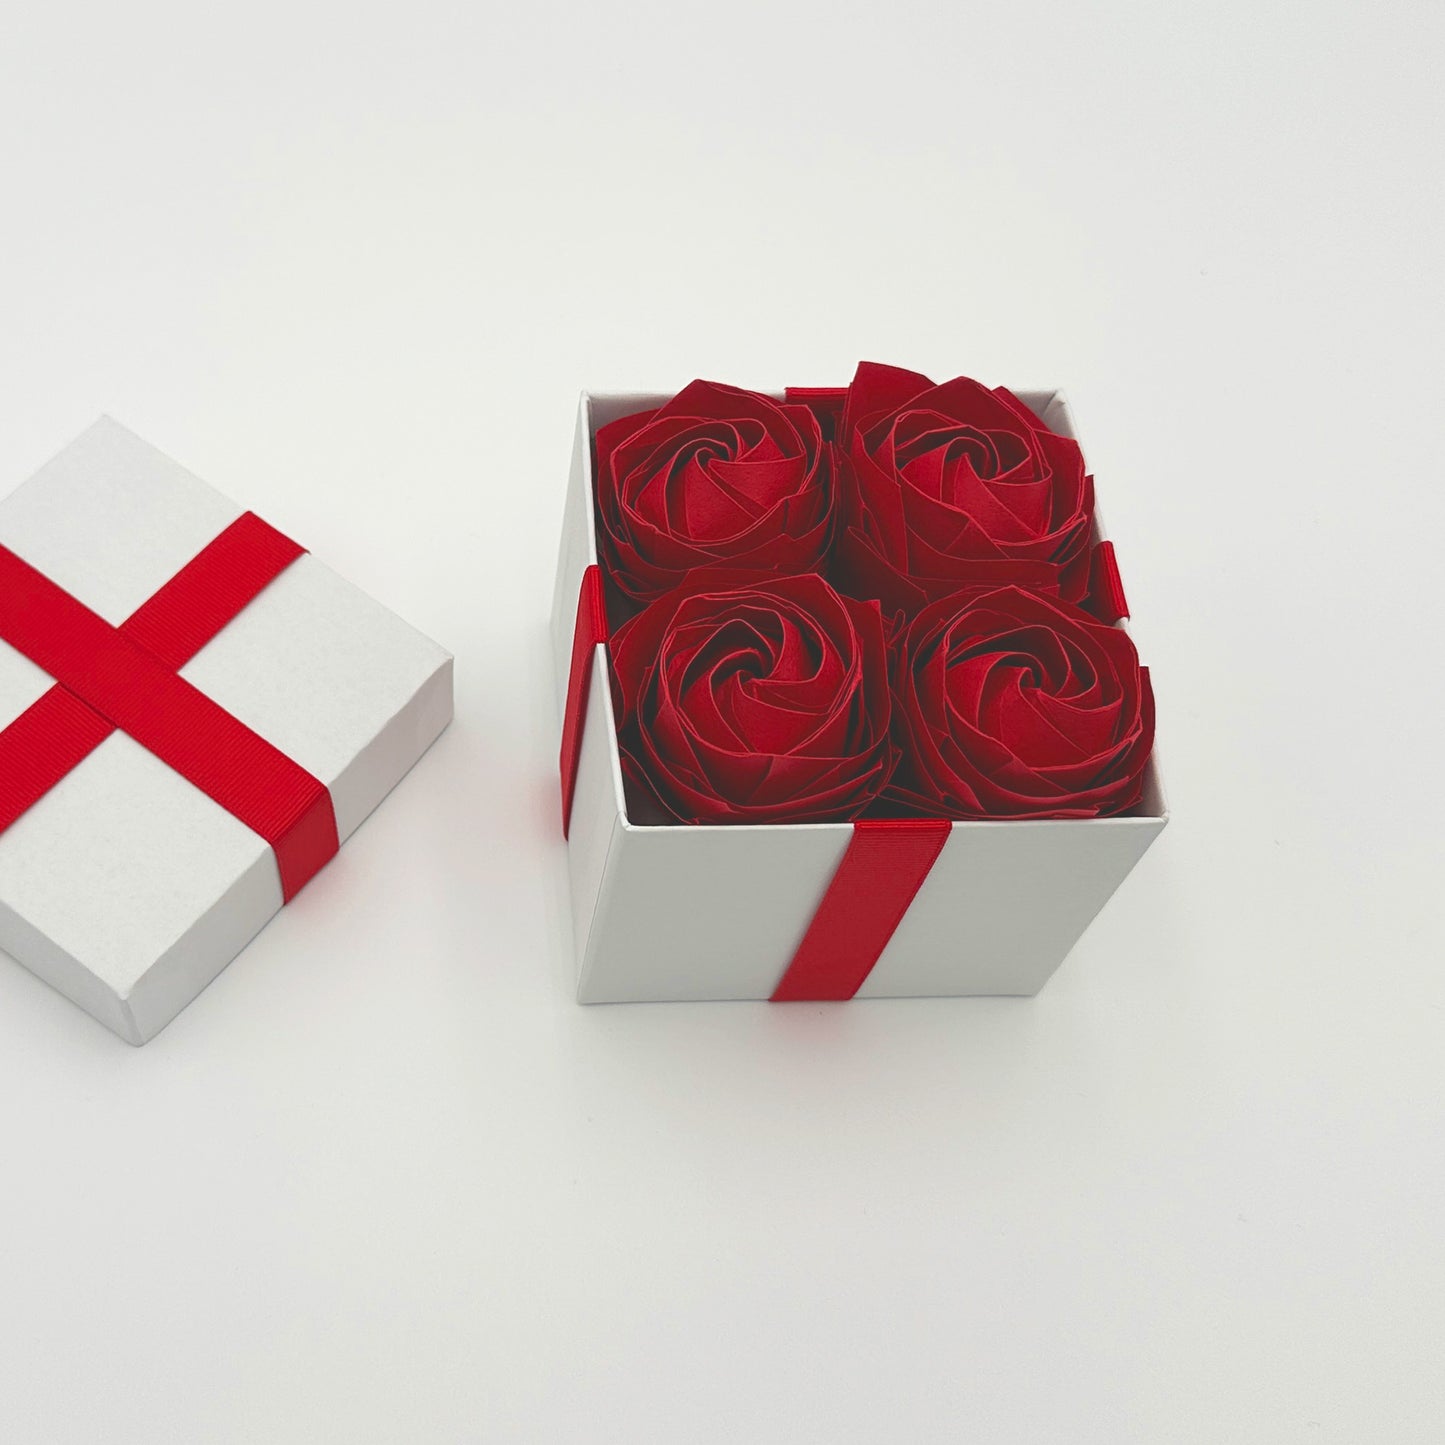 Small Square Red Rose Box